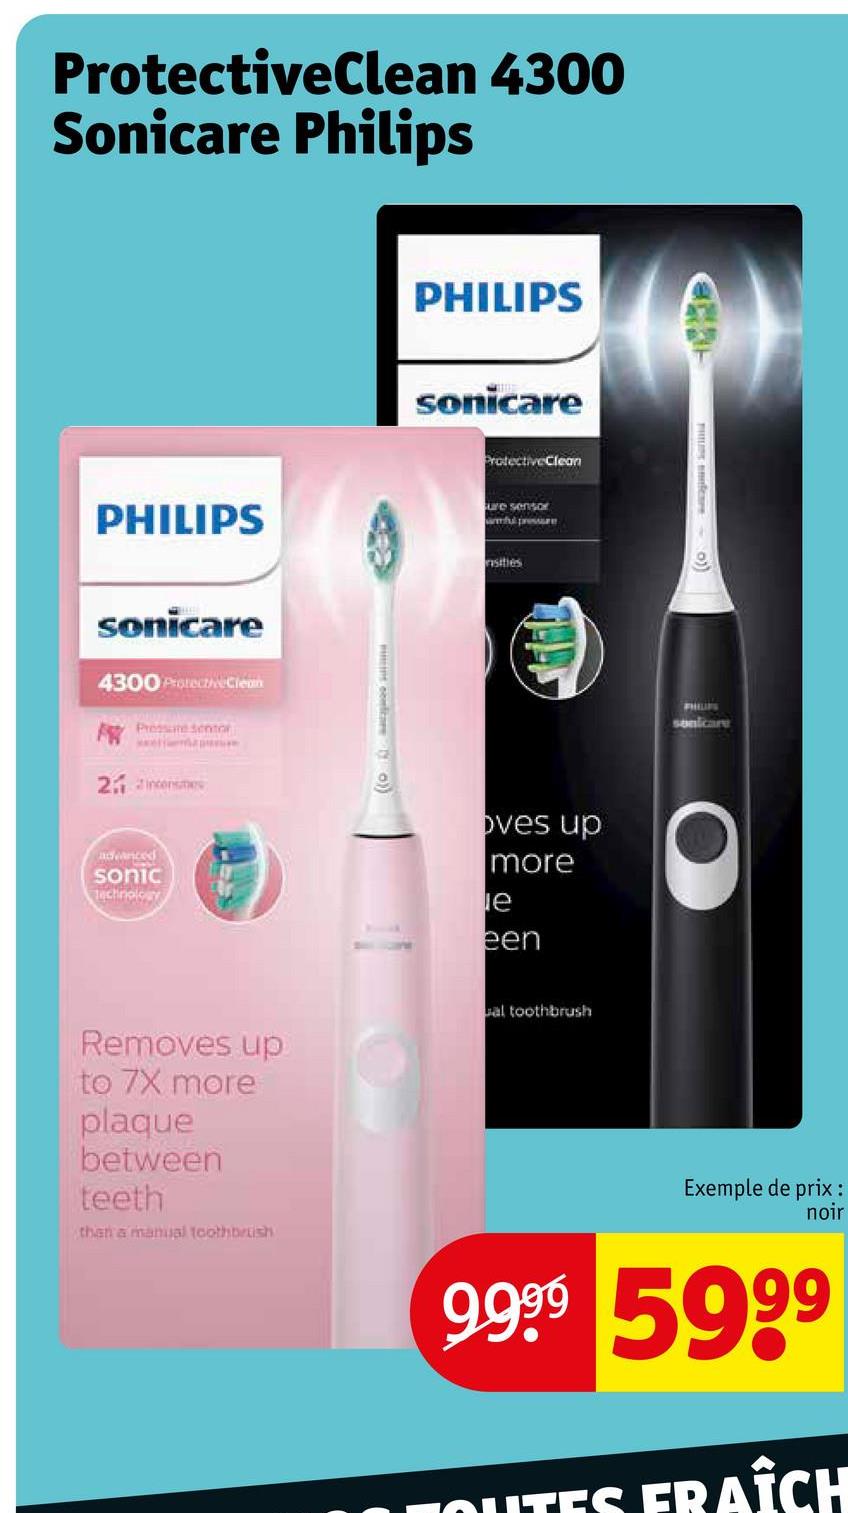 ProtectiveClean 4300
Sonicare Philips
PHILIPS
sonicare
4300 Protective Clean
Presen
21 incenses
advanced
sonic
technology
Removes up
to 7X more
plaque
between
teeth
than a manual toothbrush
mint contrare
PHILIPS
sonicare
ProtectiveClean
ure sensor
mful pressure
sities
oves up
more
le
een
al toothbrush
9
PHILIPS
sonicare
Exemple de prix :
noir
9.9⁹9 59⁹⁹
OUTES FRAÎCH